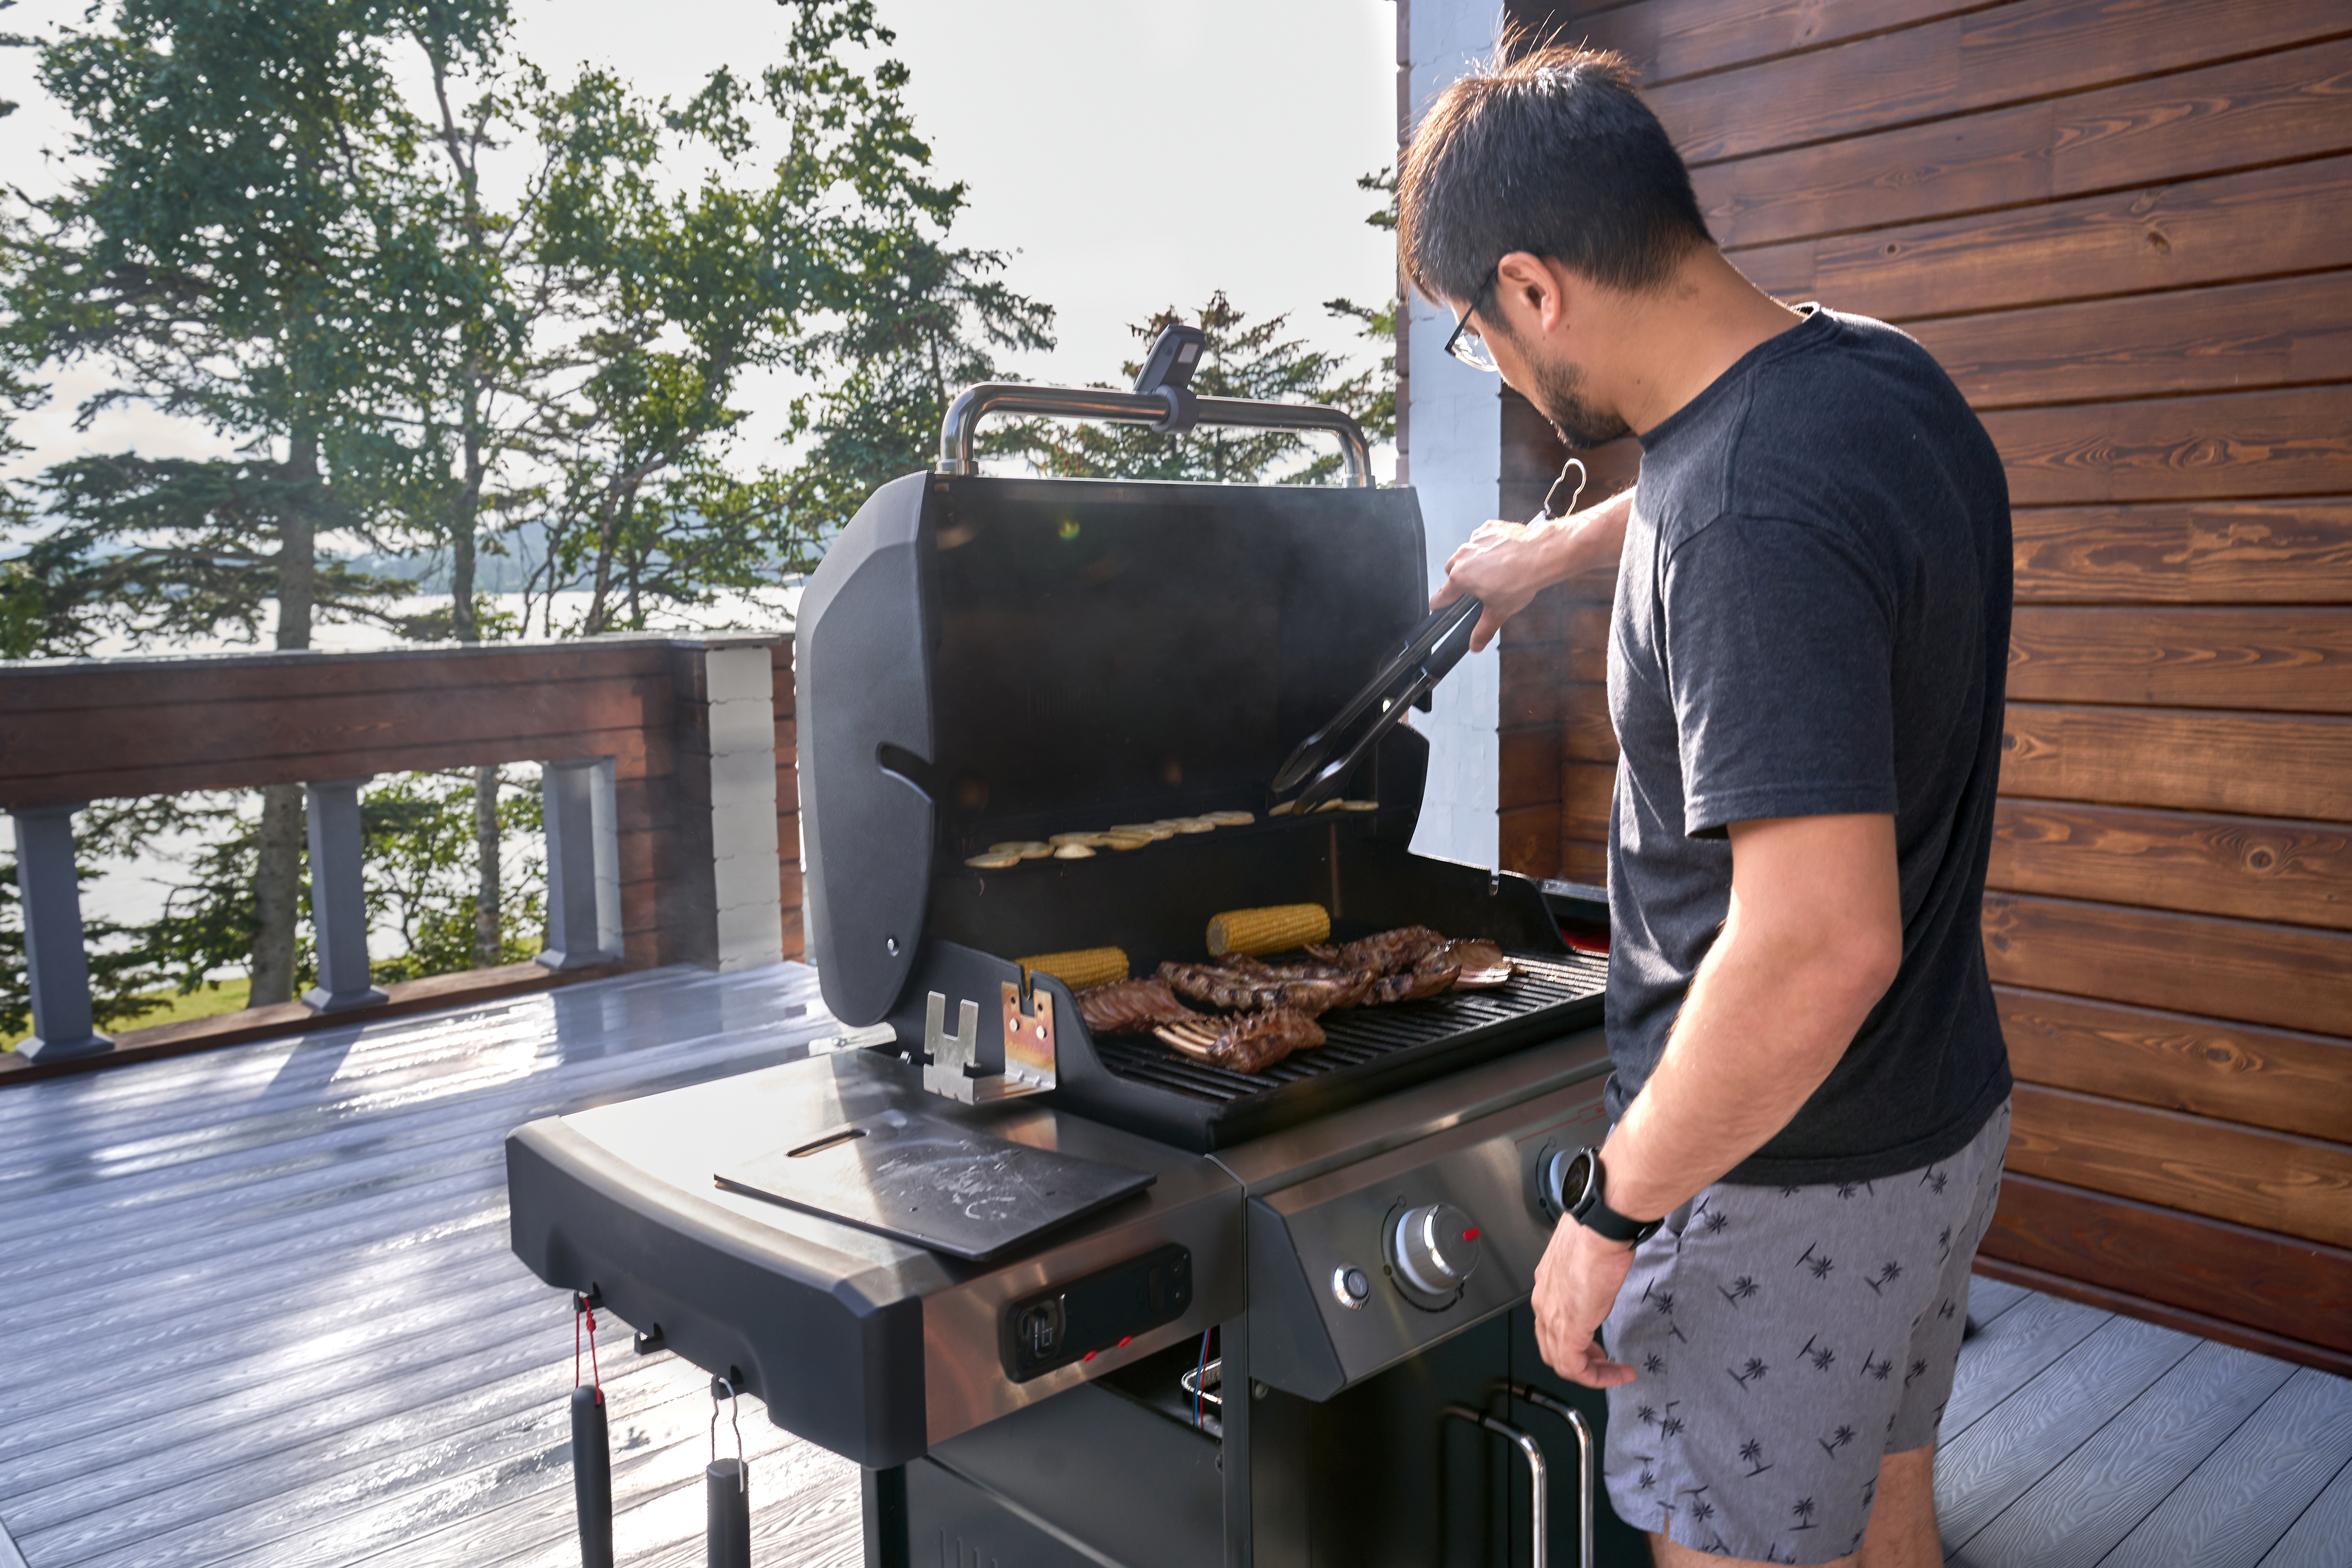 Person grilling food on an outdoor barbecue on a deck, with trees and a lake in the background